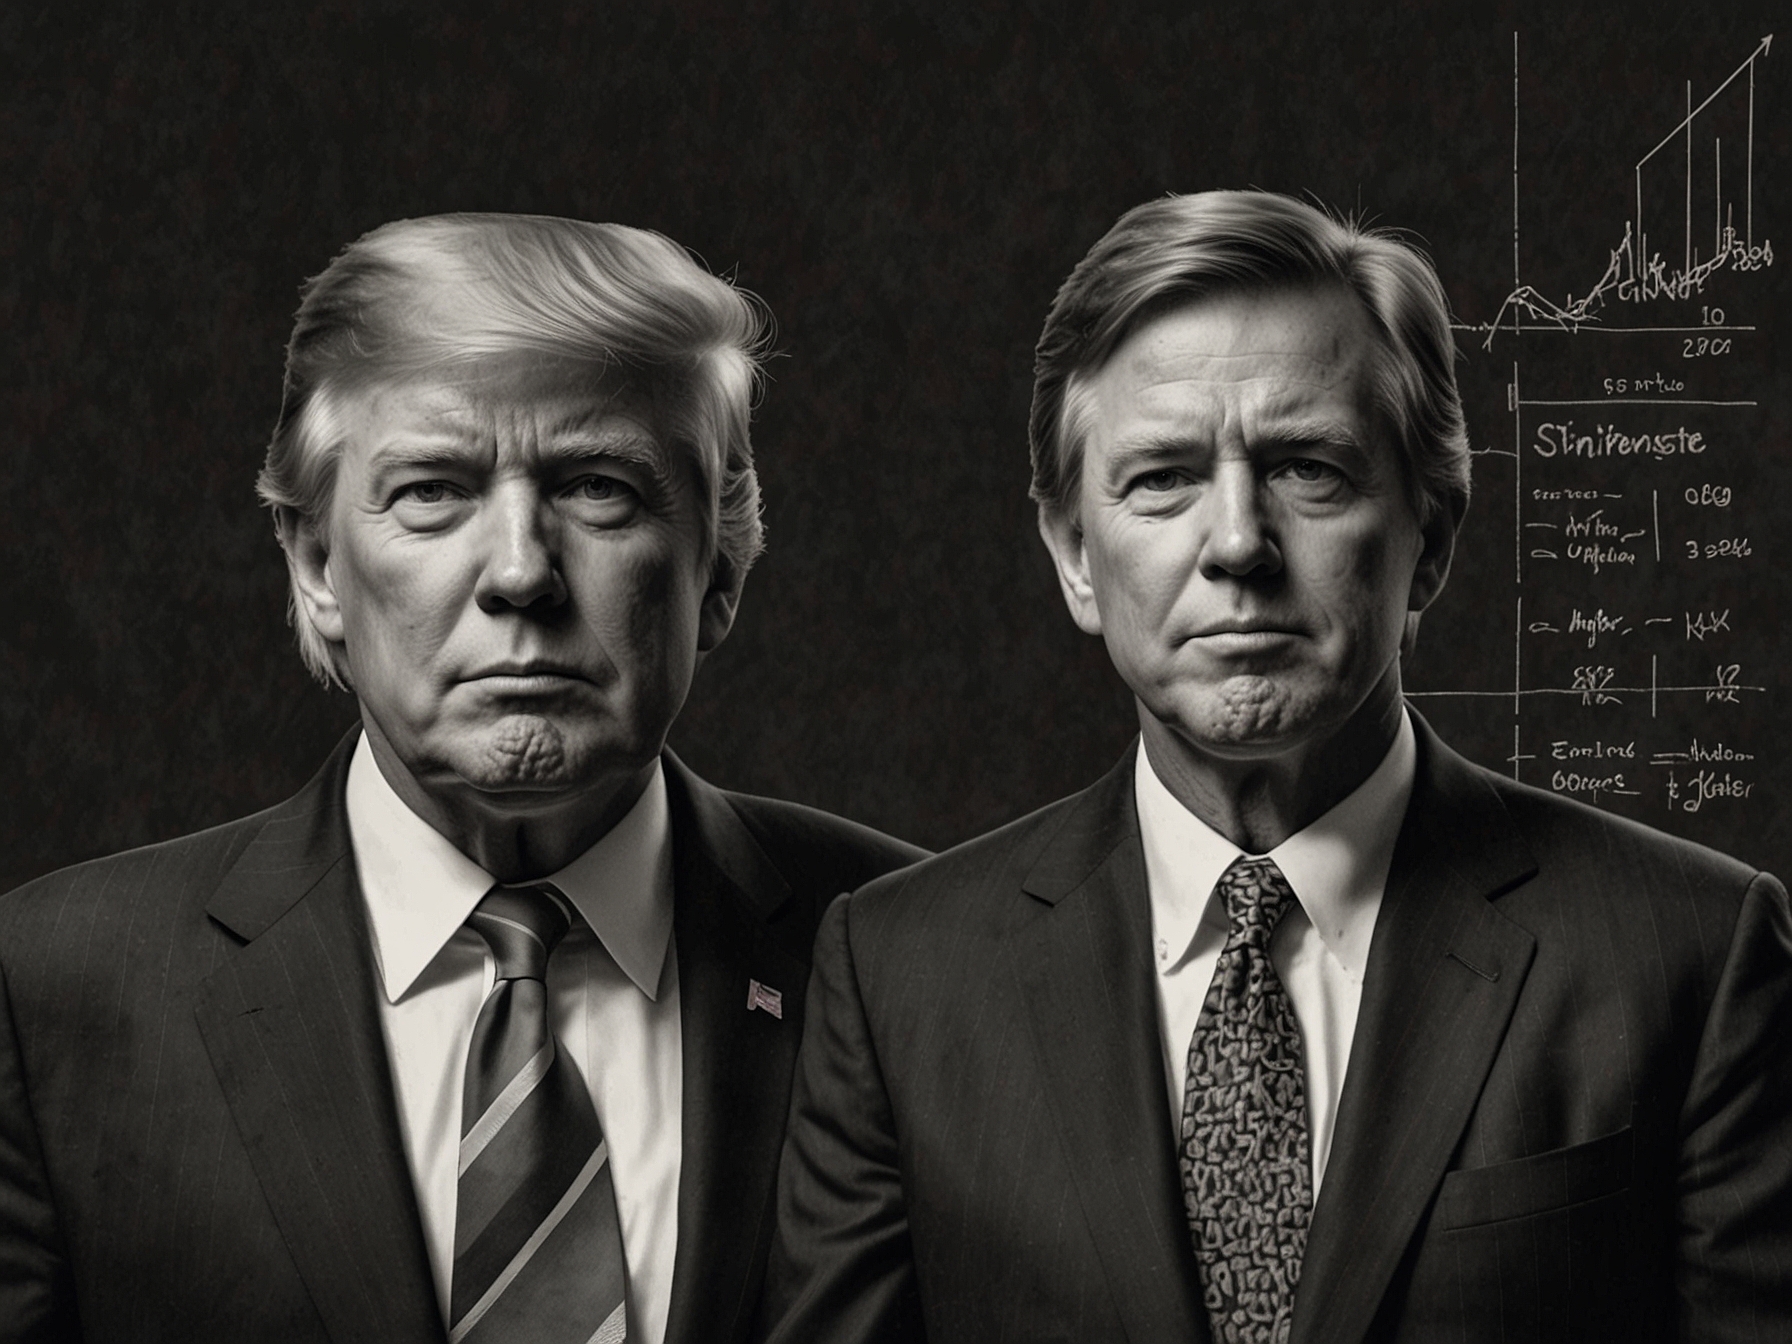 Graphics showing split funds, with $75 million going to Trump's super PAC and $25 million to RFK Jr.'s group, highlighting Mellon's significant financial influence in politics.